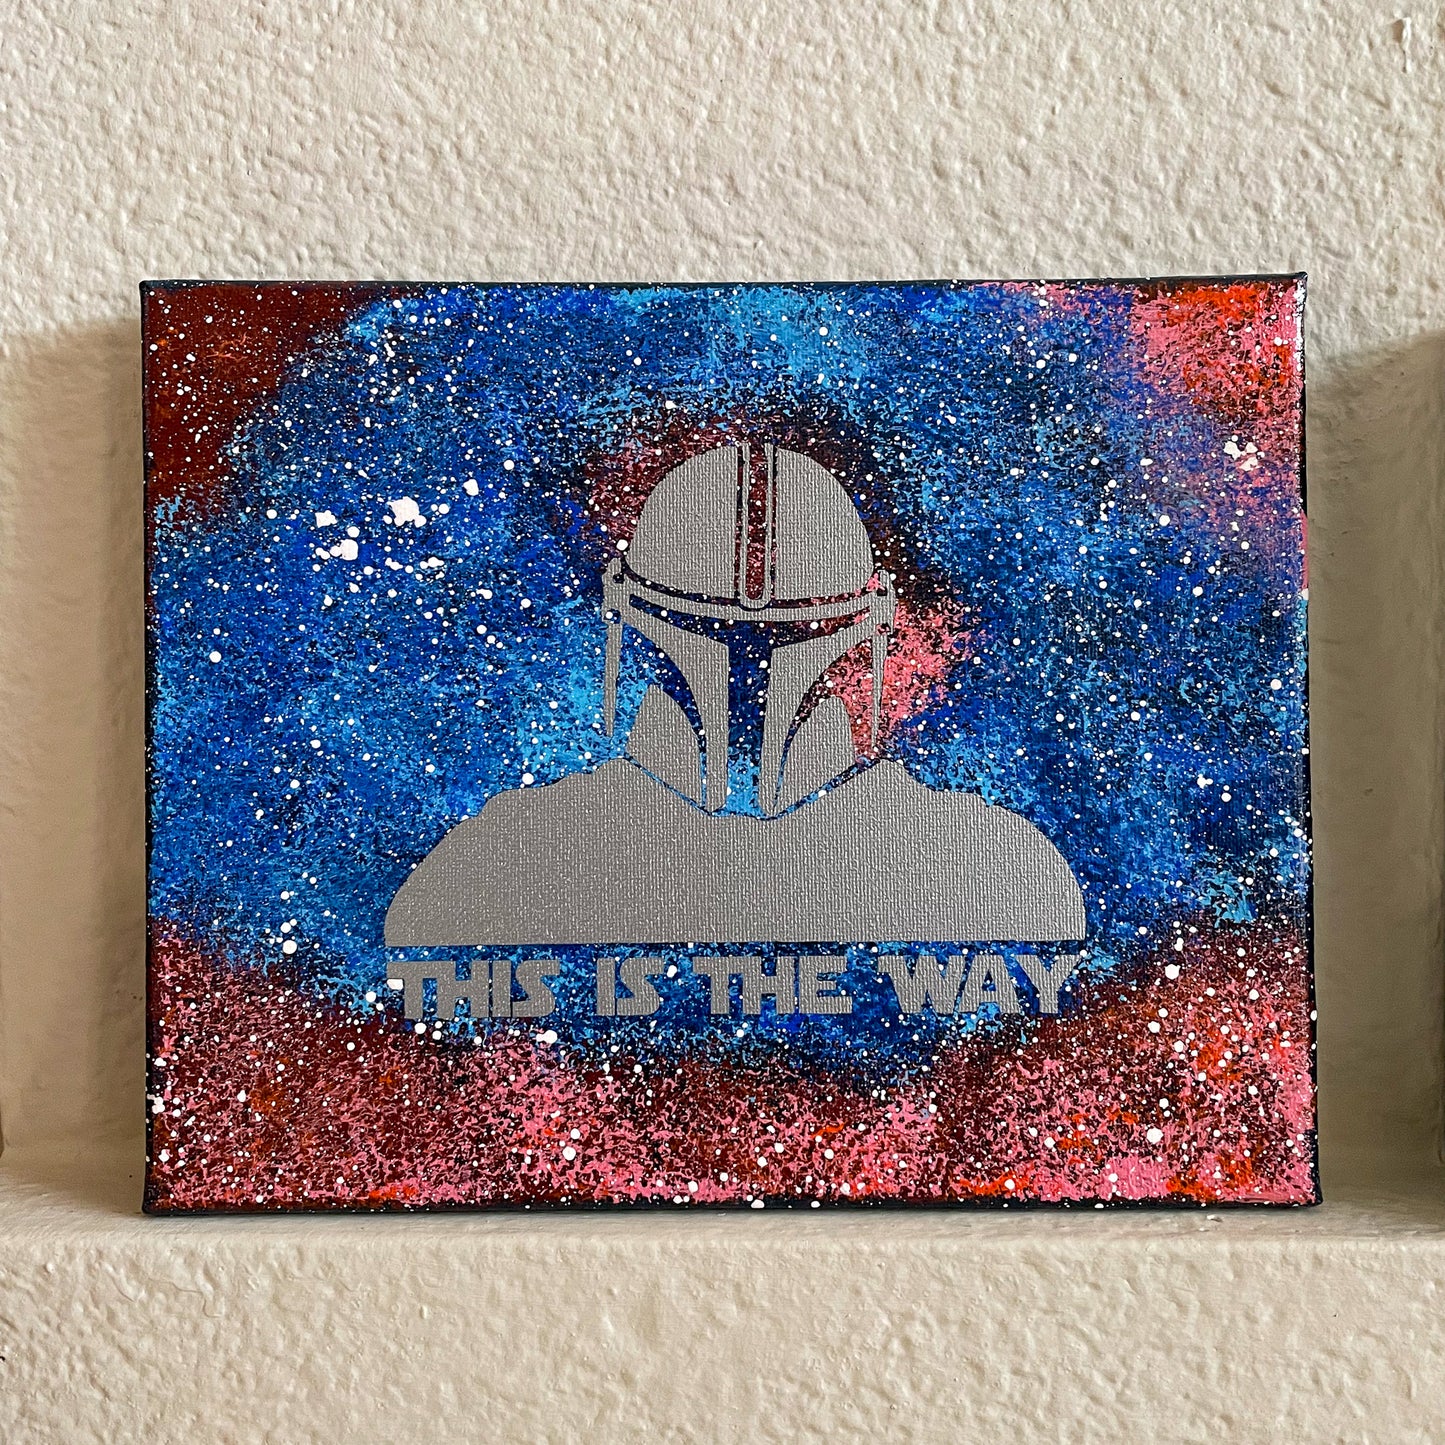 This is the Way Blue and Salmon 8x10 Geek Galaxy Painting